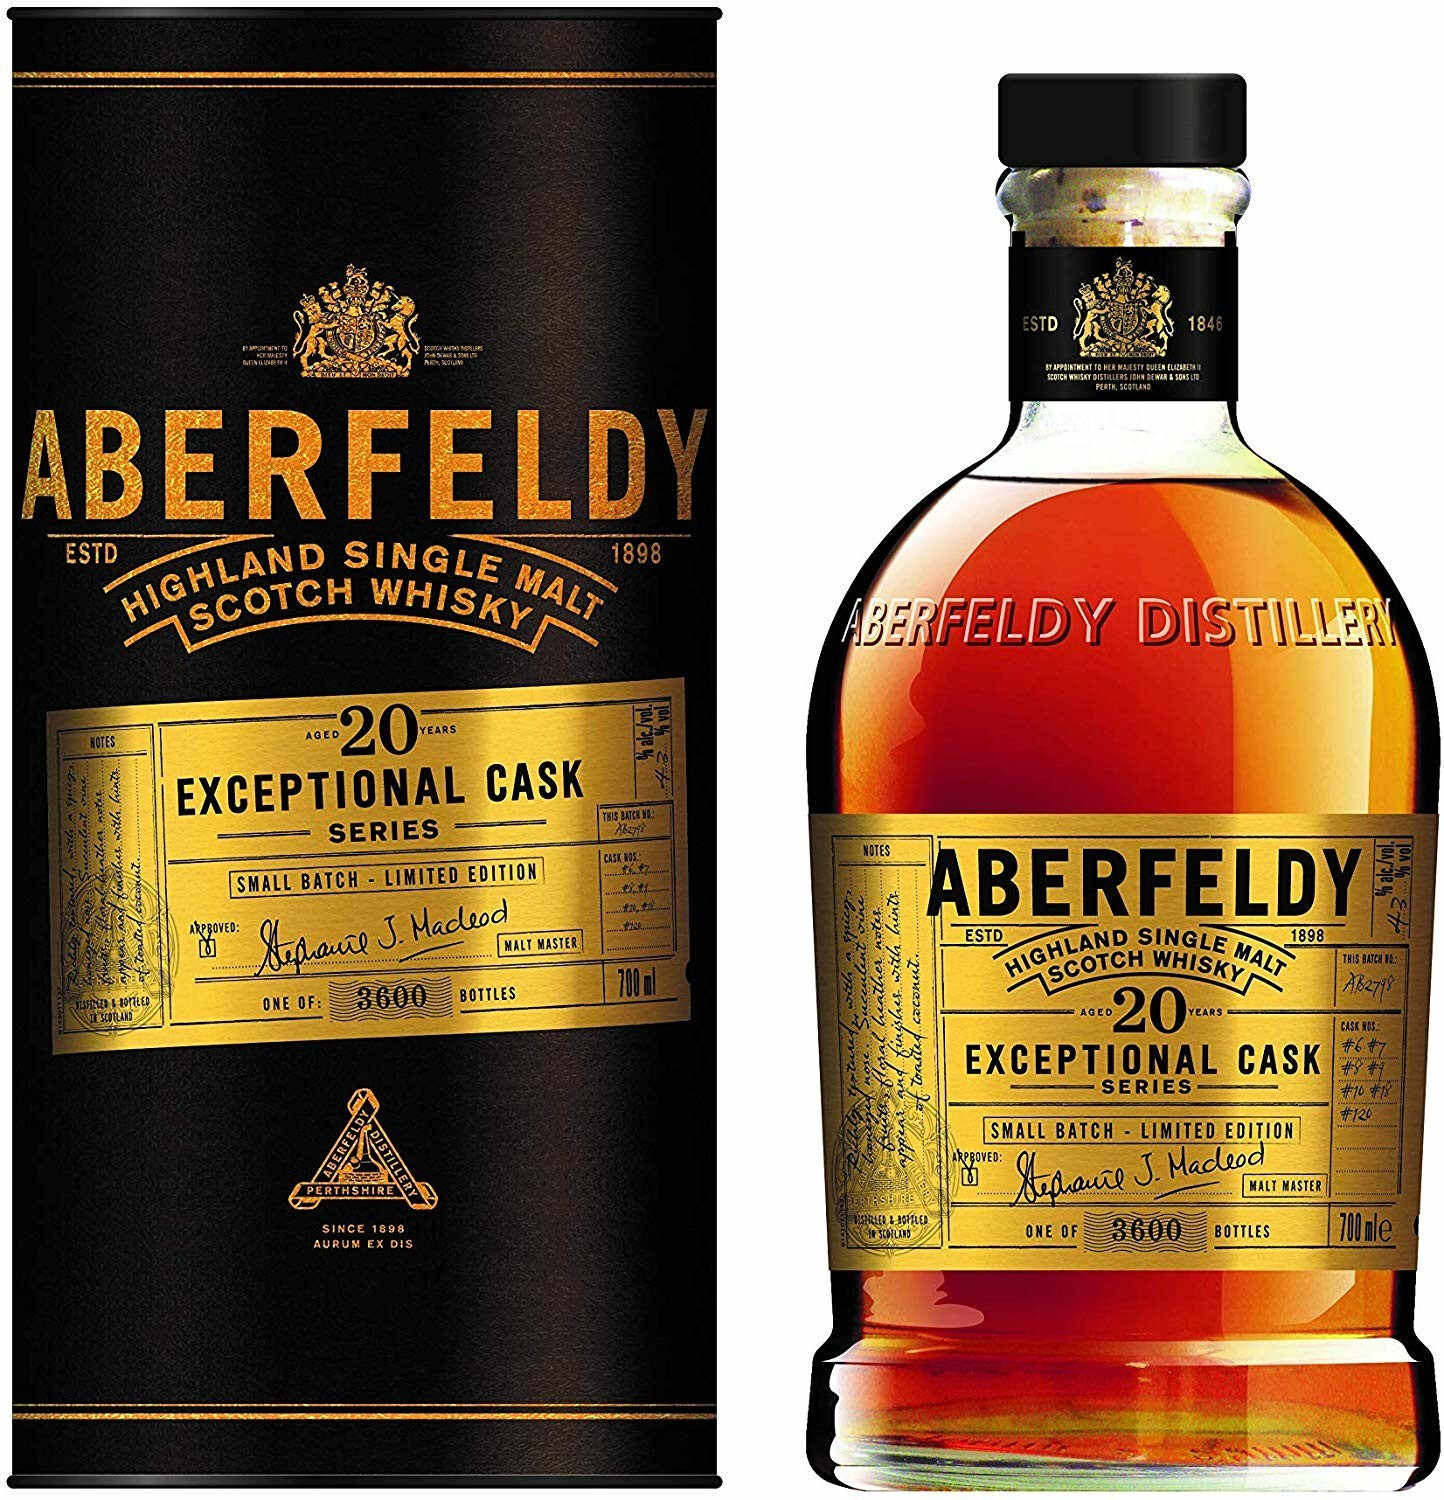 Aberfeldy 20 Years Exceptional Cask Series 0.7l 43%